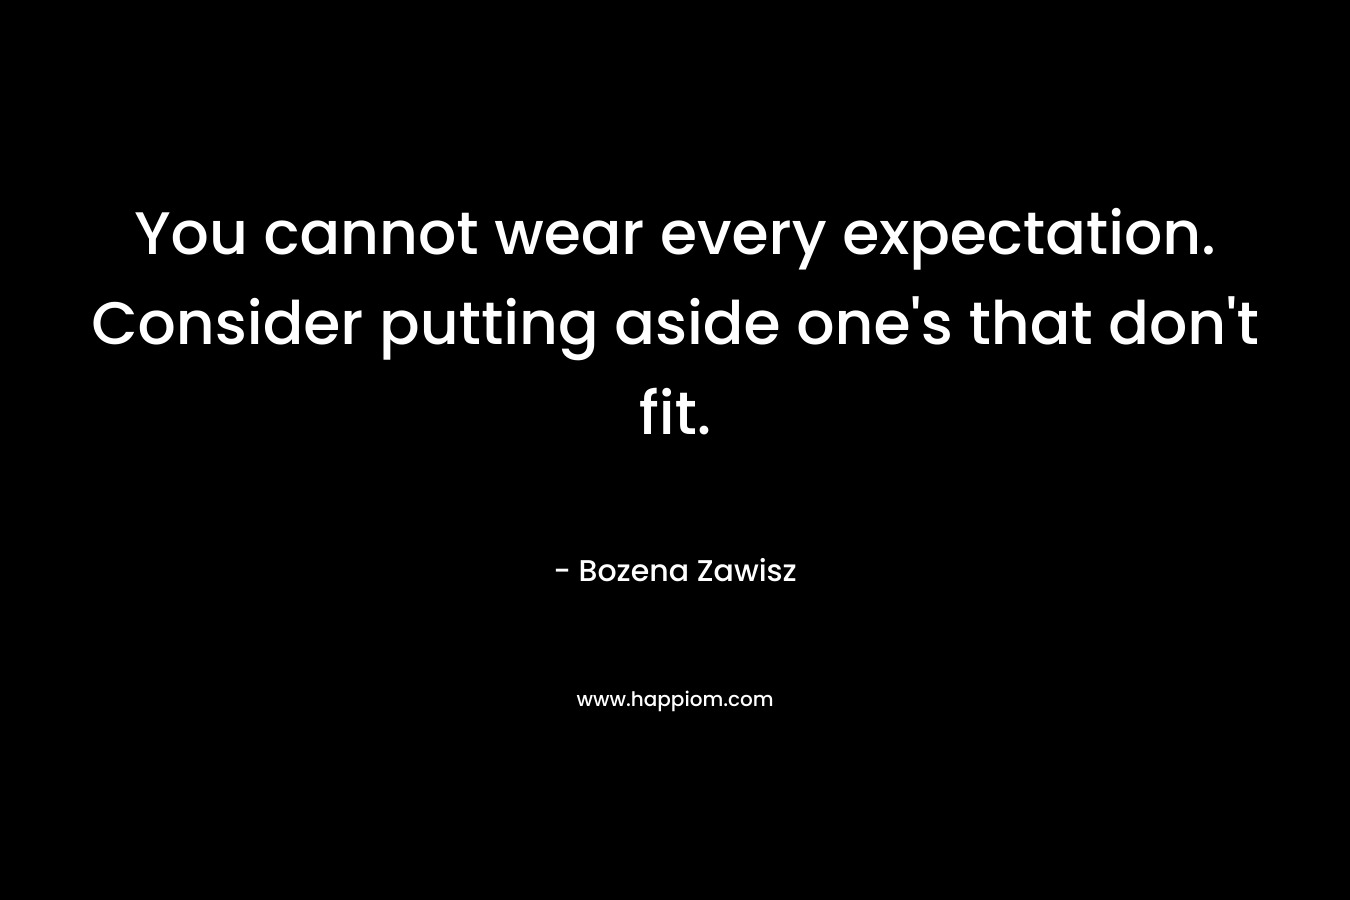 You cannot wear every expectation. Consider putting aside one's that don't fit.